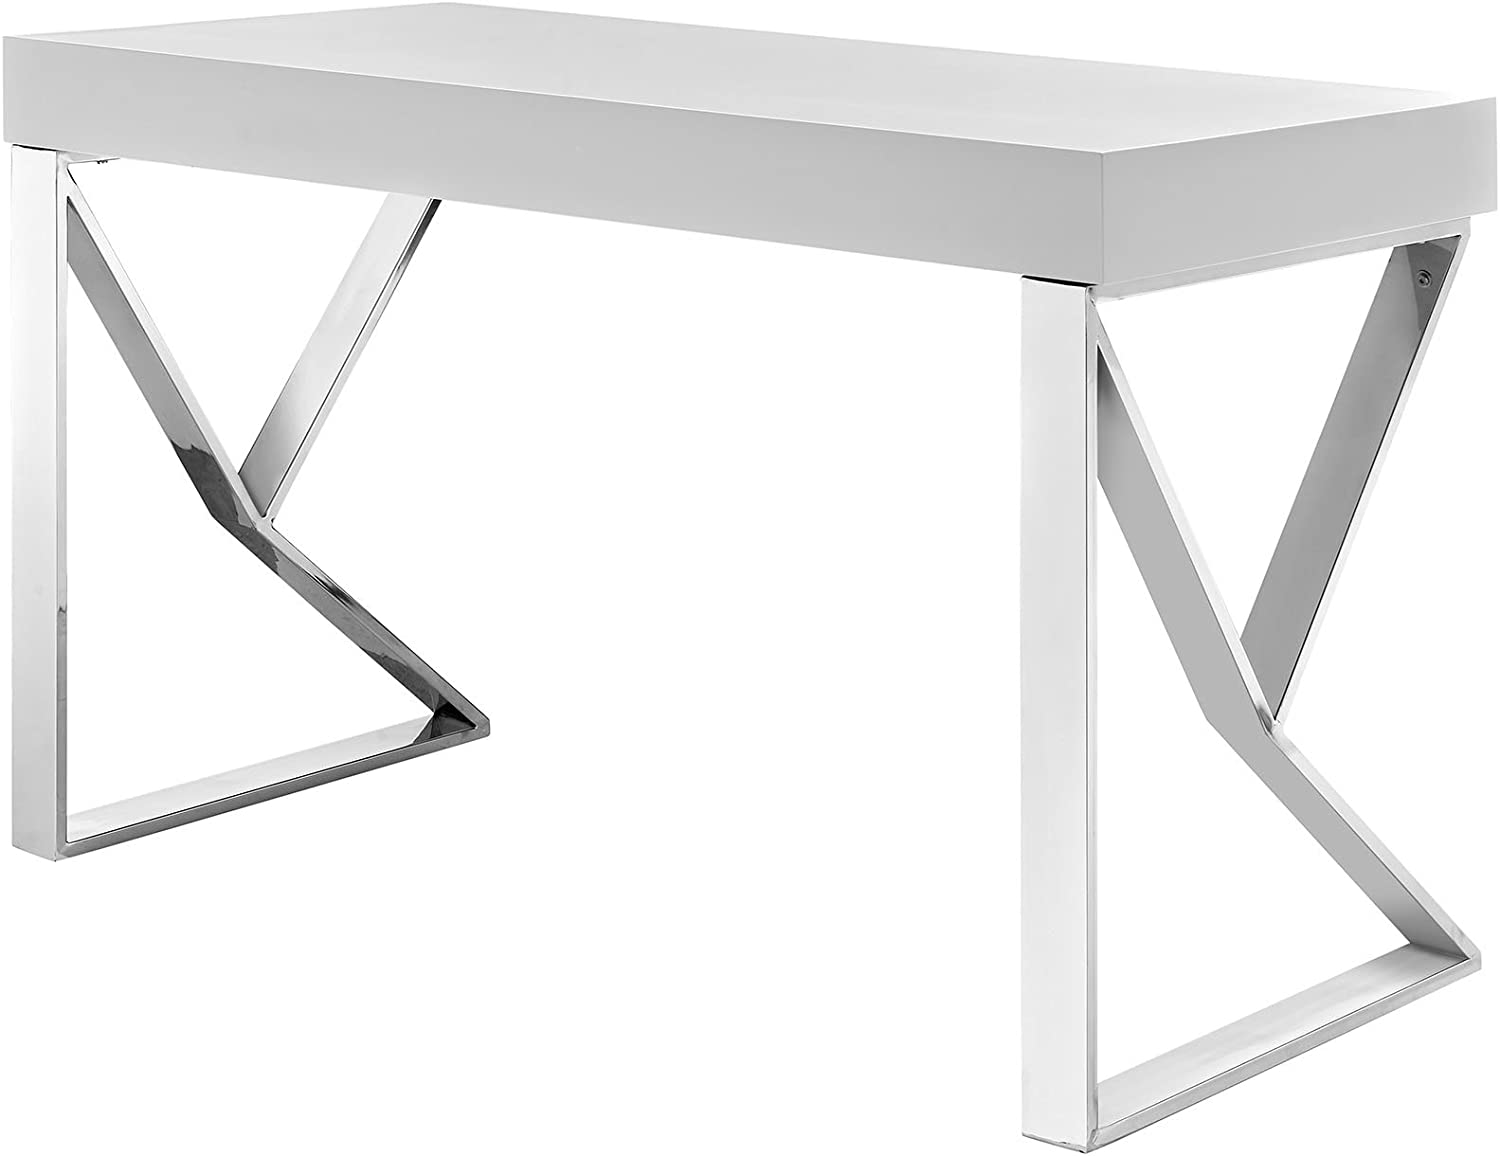 Modway Adjacent Contemporary Modern Office Desk With Metallic Legs in White